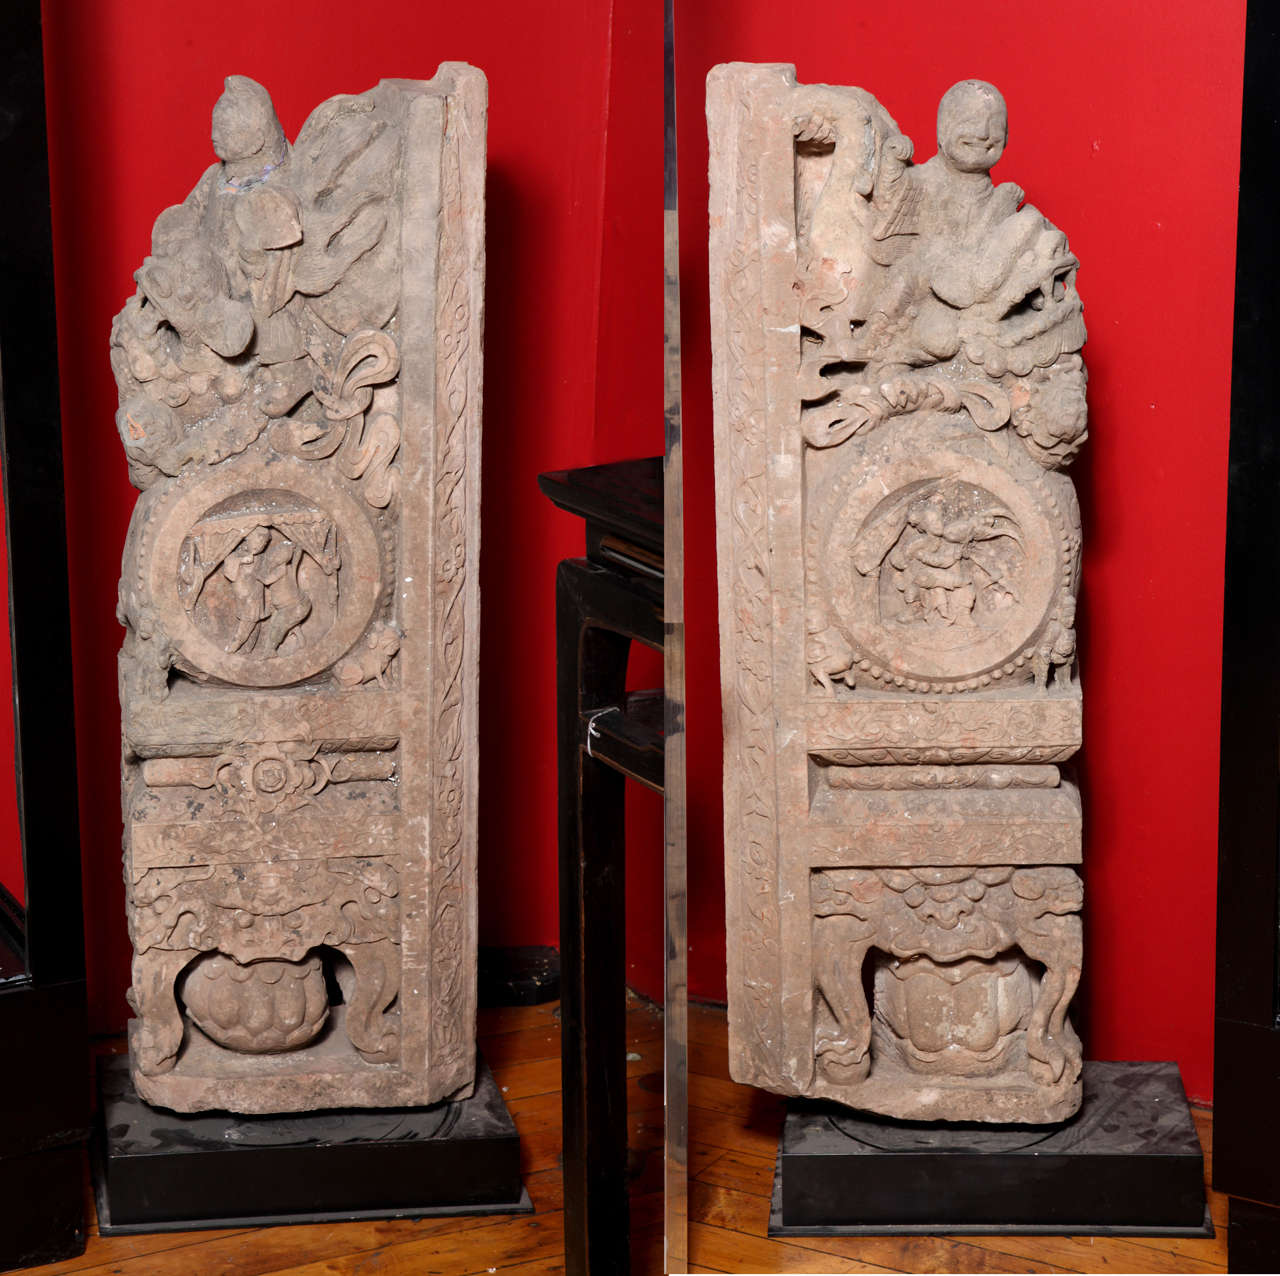 This rare pair of architectural stone carvings comes from a Chinese temple constructed during the Ming dynasty (1368-1644). Each carving is adorned with three registers, with the bottom displaying a monster figure of the antique taotie pattern,